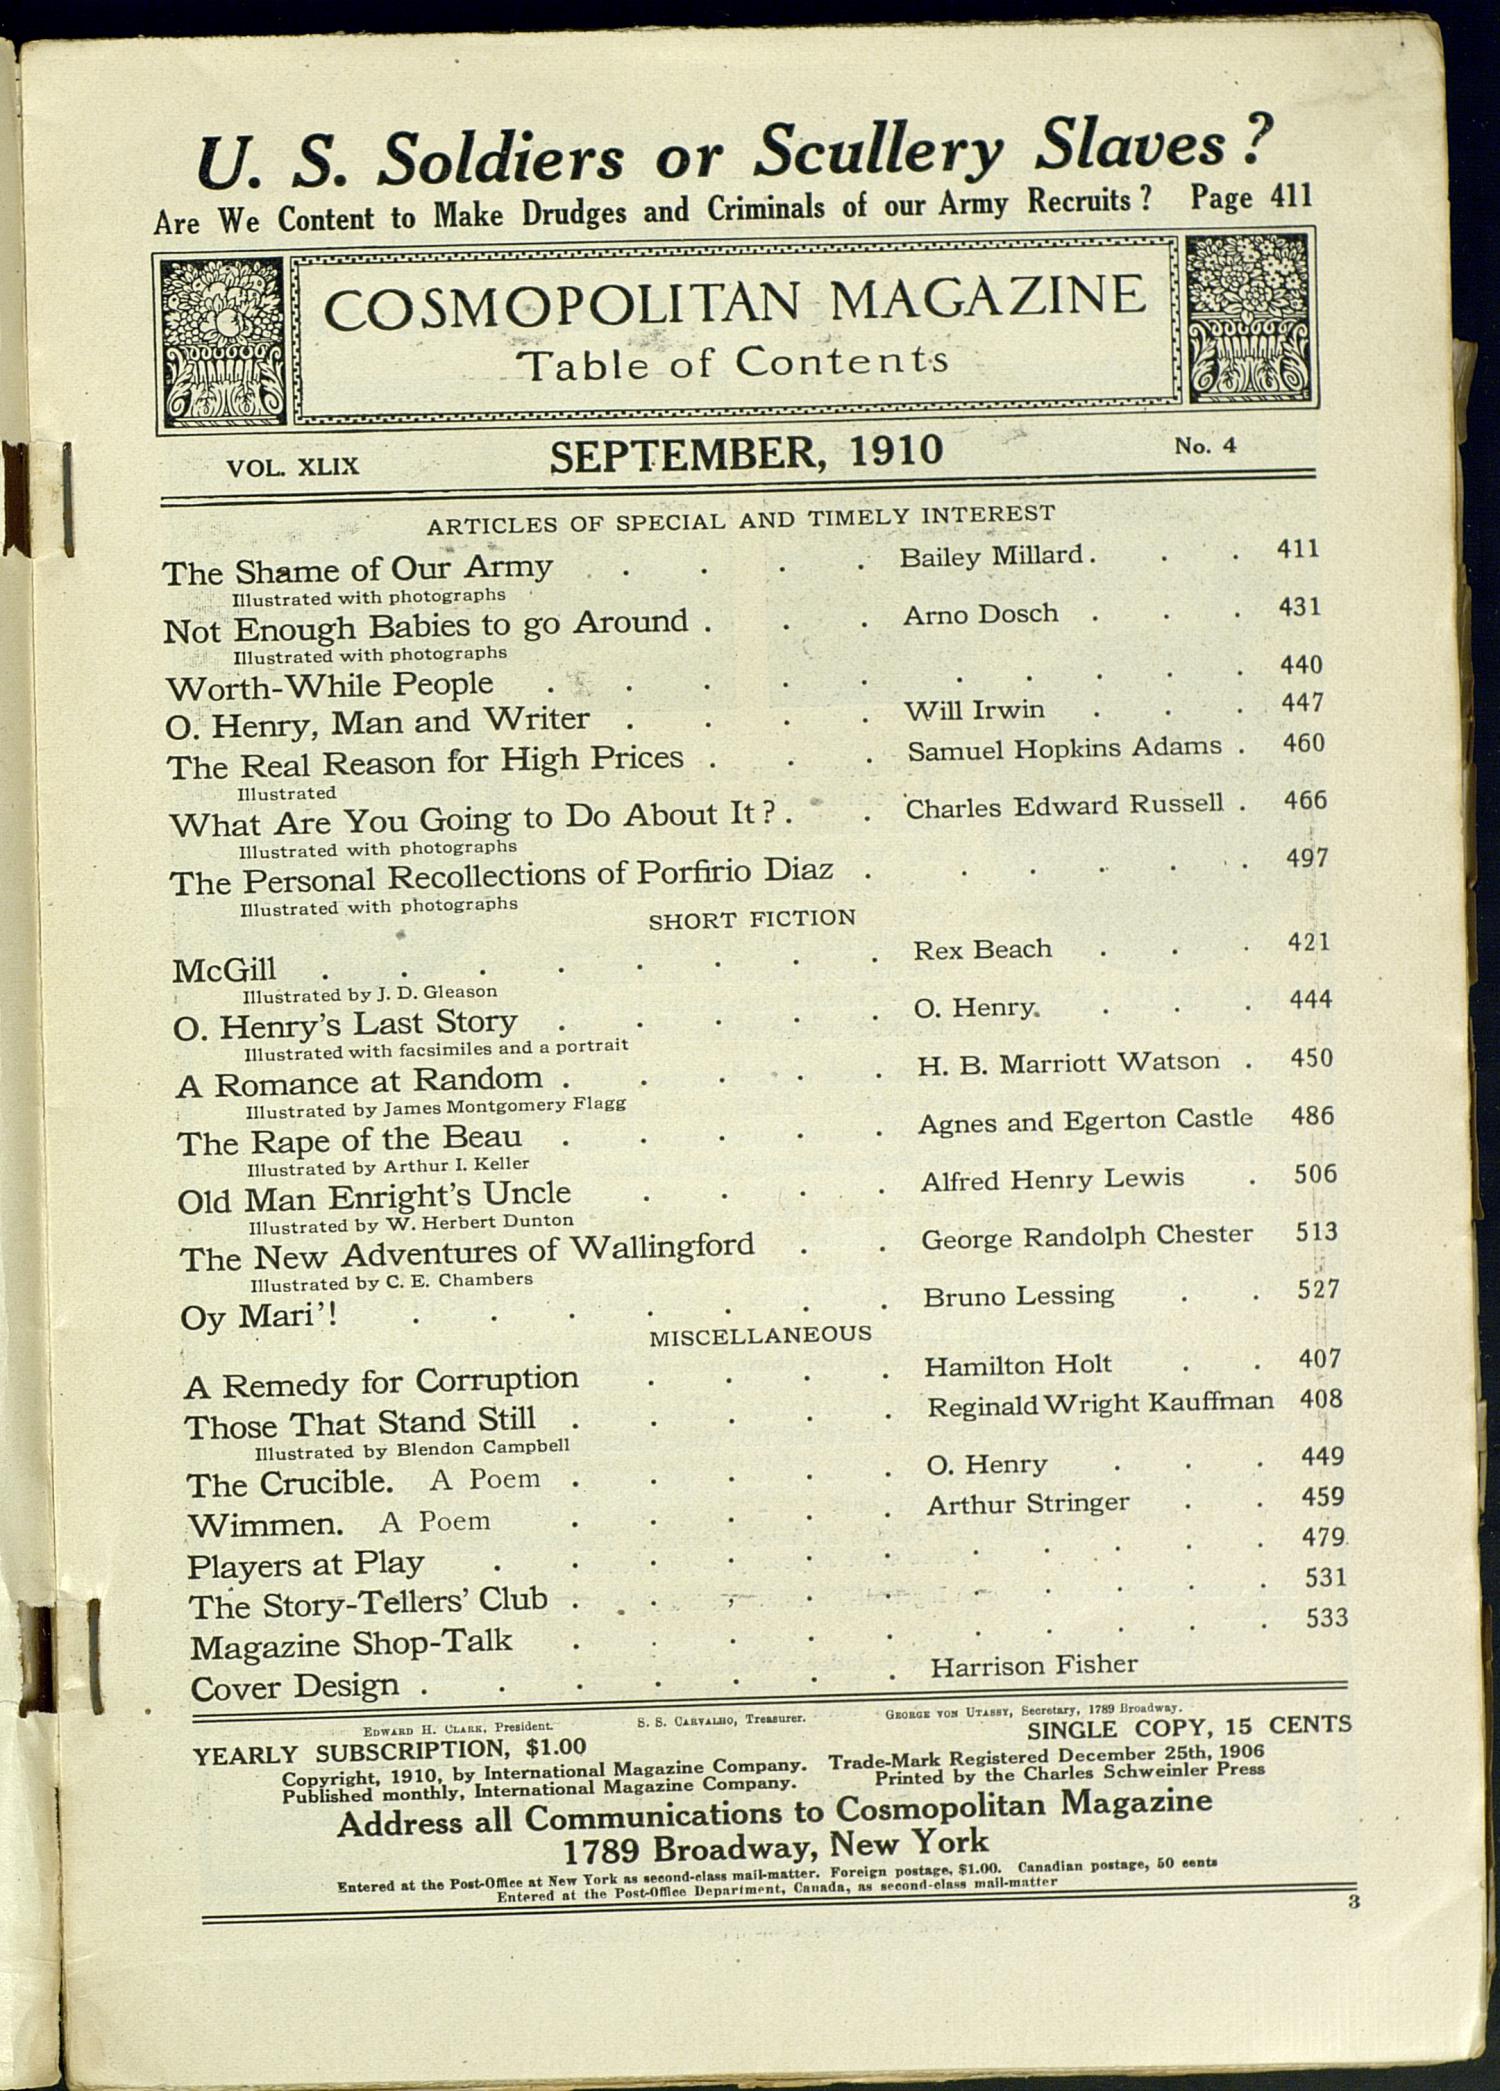 O. Henry's Last Story
                                                
                                                    Table of Contents
                                                